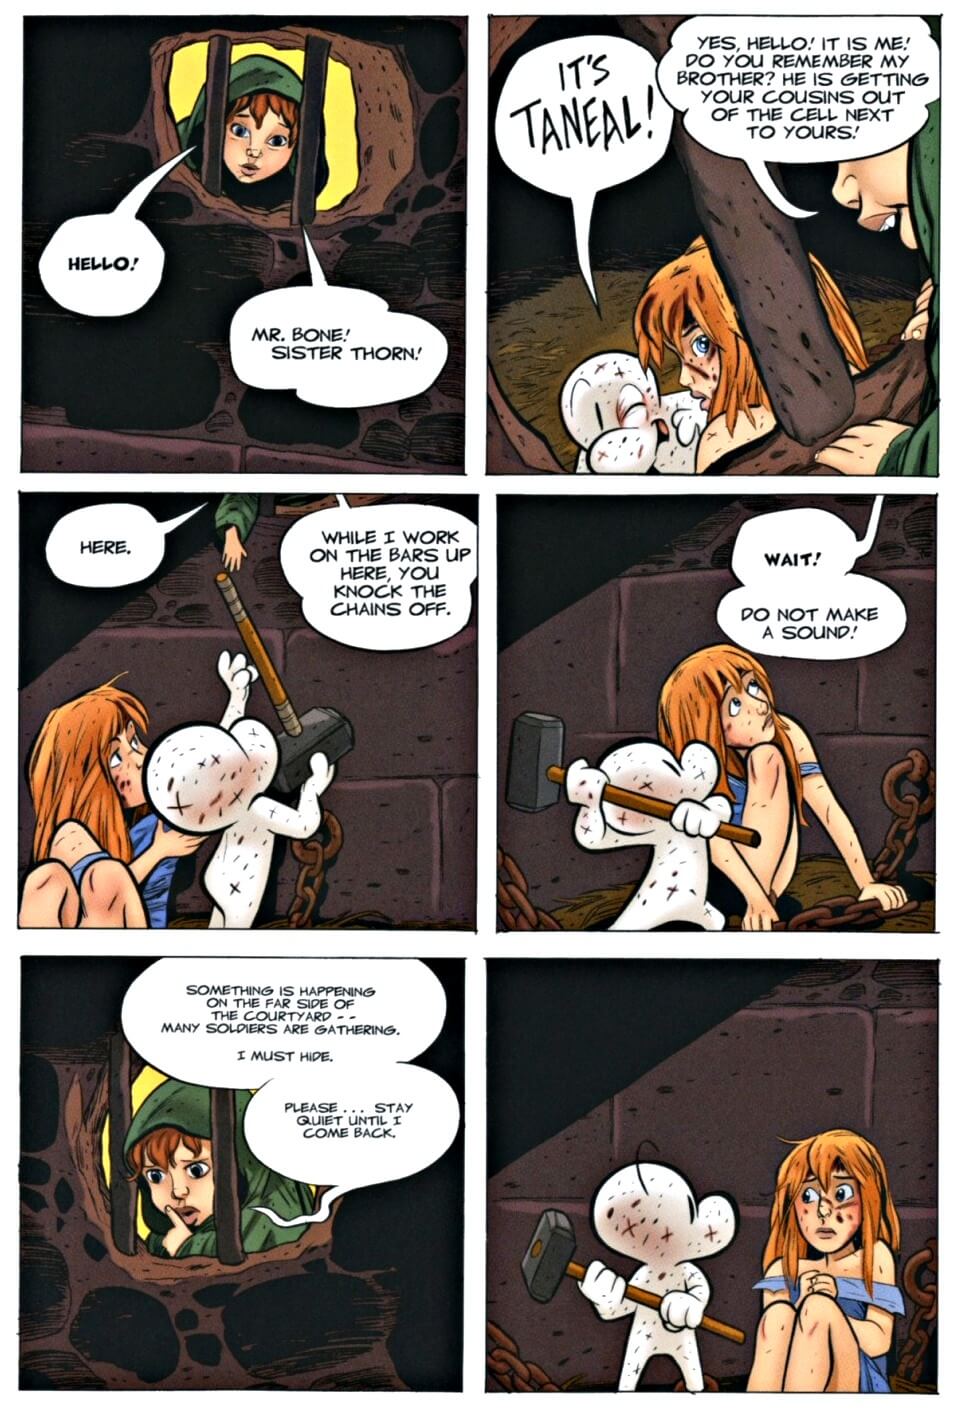 page 43 chapter 1 of bone 9 crown of horns graphic novel